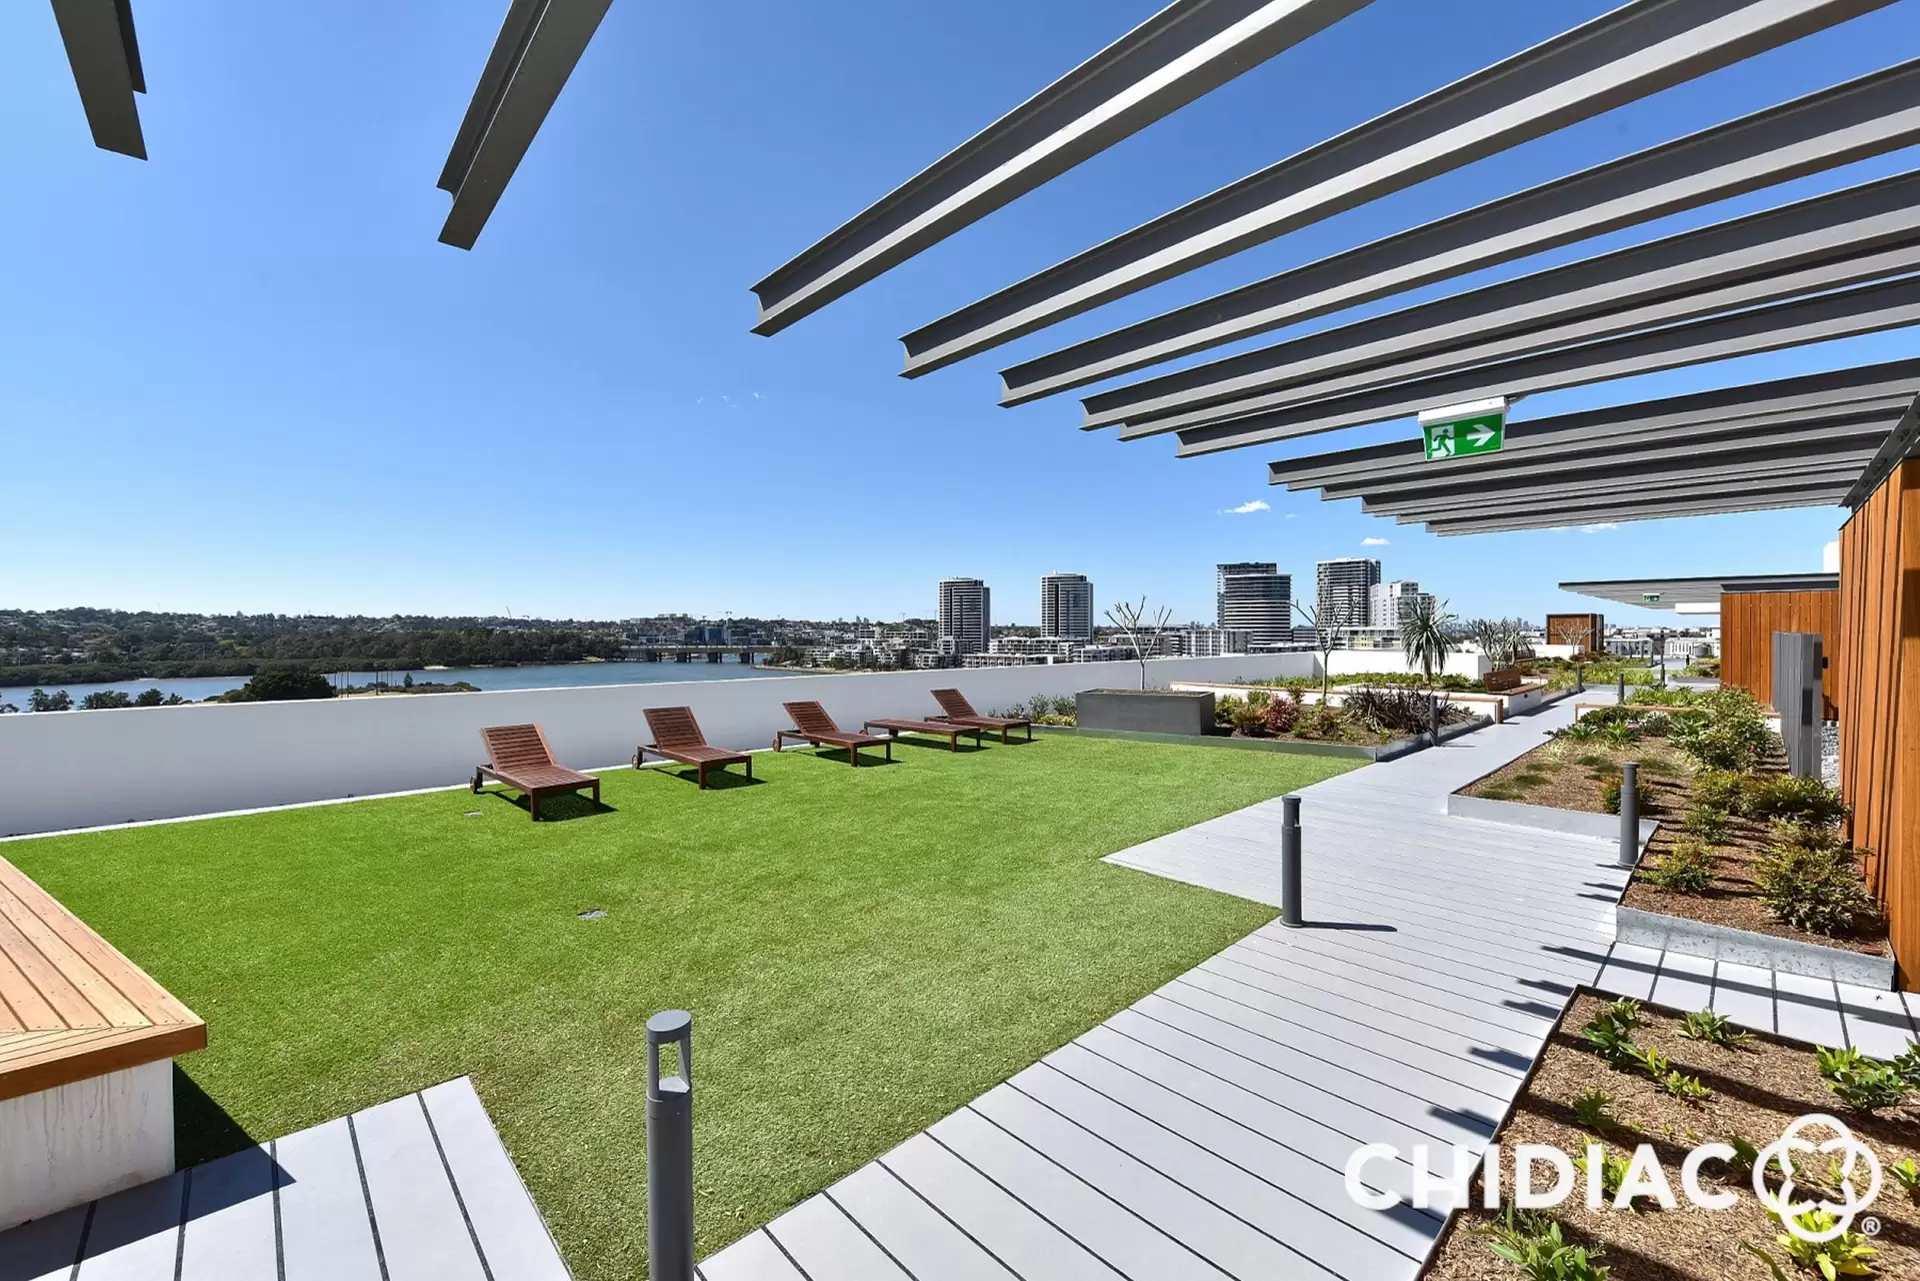 907/3 Foreshore Place, Wentworth Point Leased by Chidiac Realty - image 1